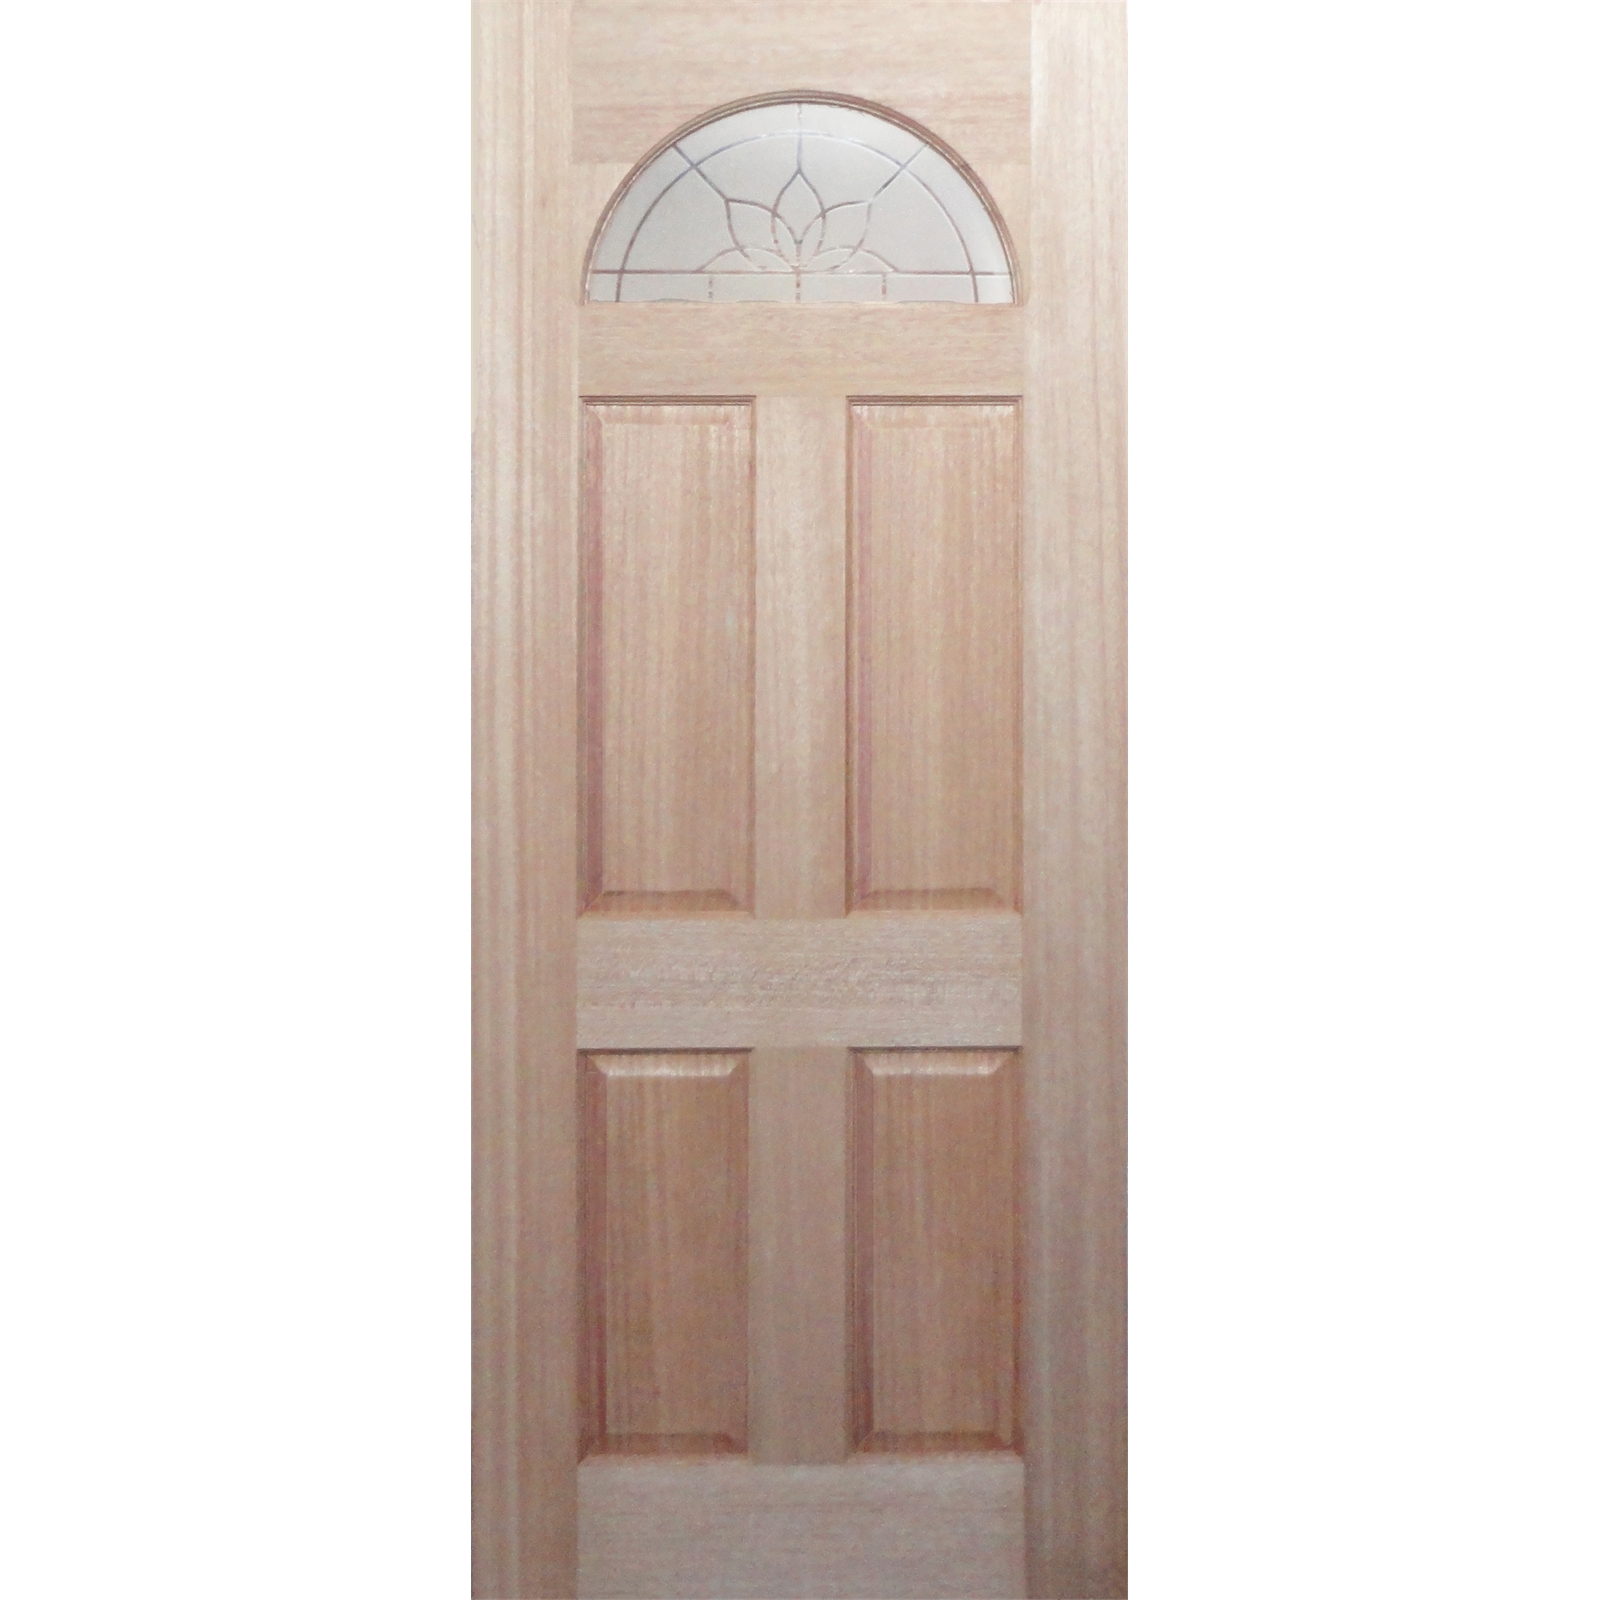 Woodcraft Doors 2040 x 820 x 40mm Carolina Entrance Door With Frosted Glass